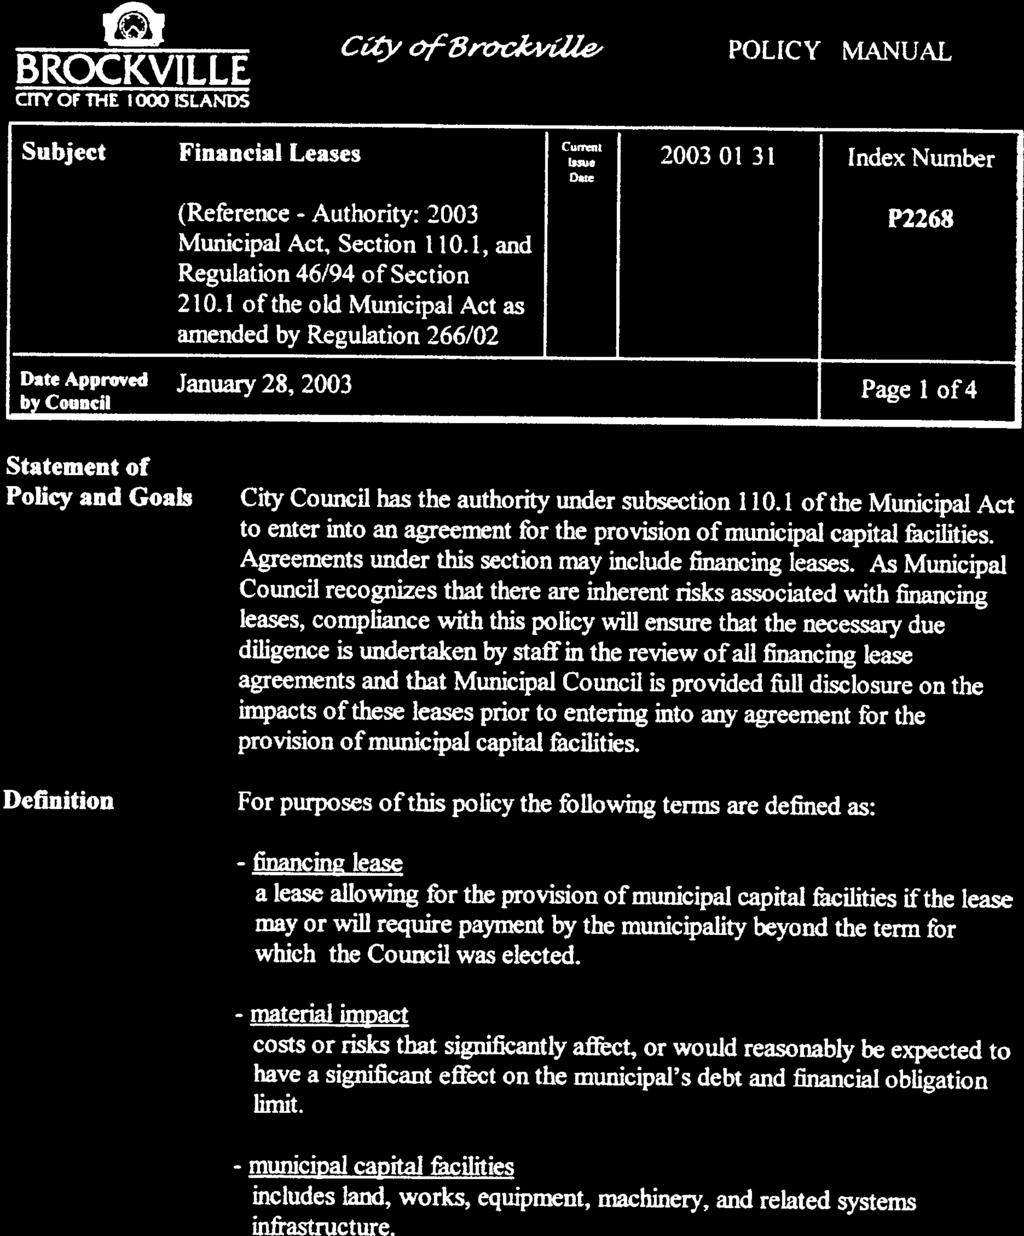 Attachment #1 to Report 2011-031-03 BROCKVILLE crr OF THE I 000 ISLANDS Cay o/8rc ckvti1e POLICY?